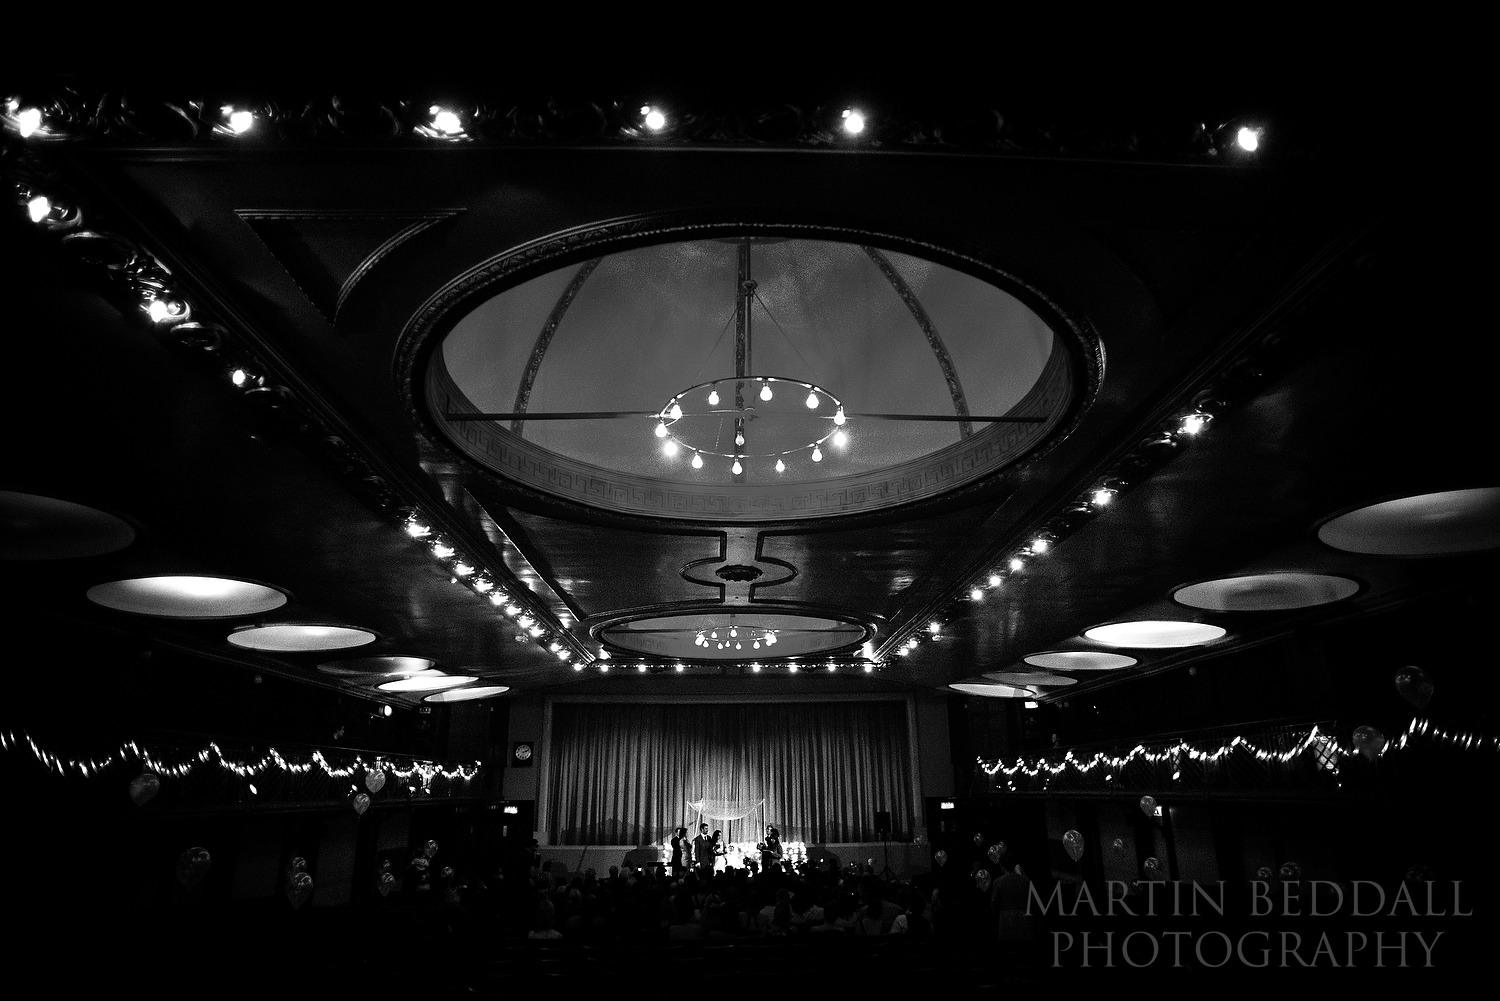 Wedding ceremony in the Dome cinema in Worthing